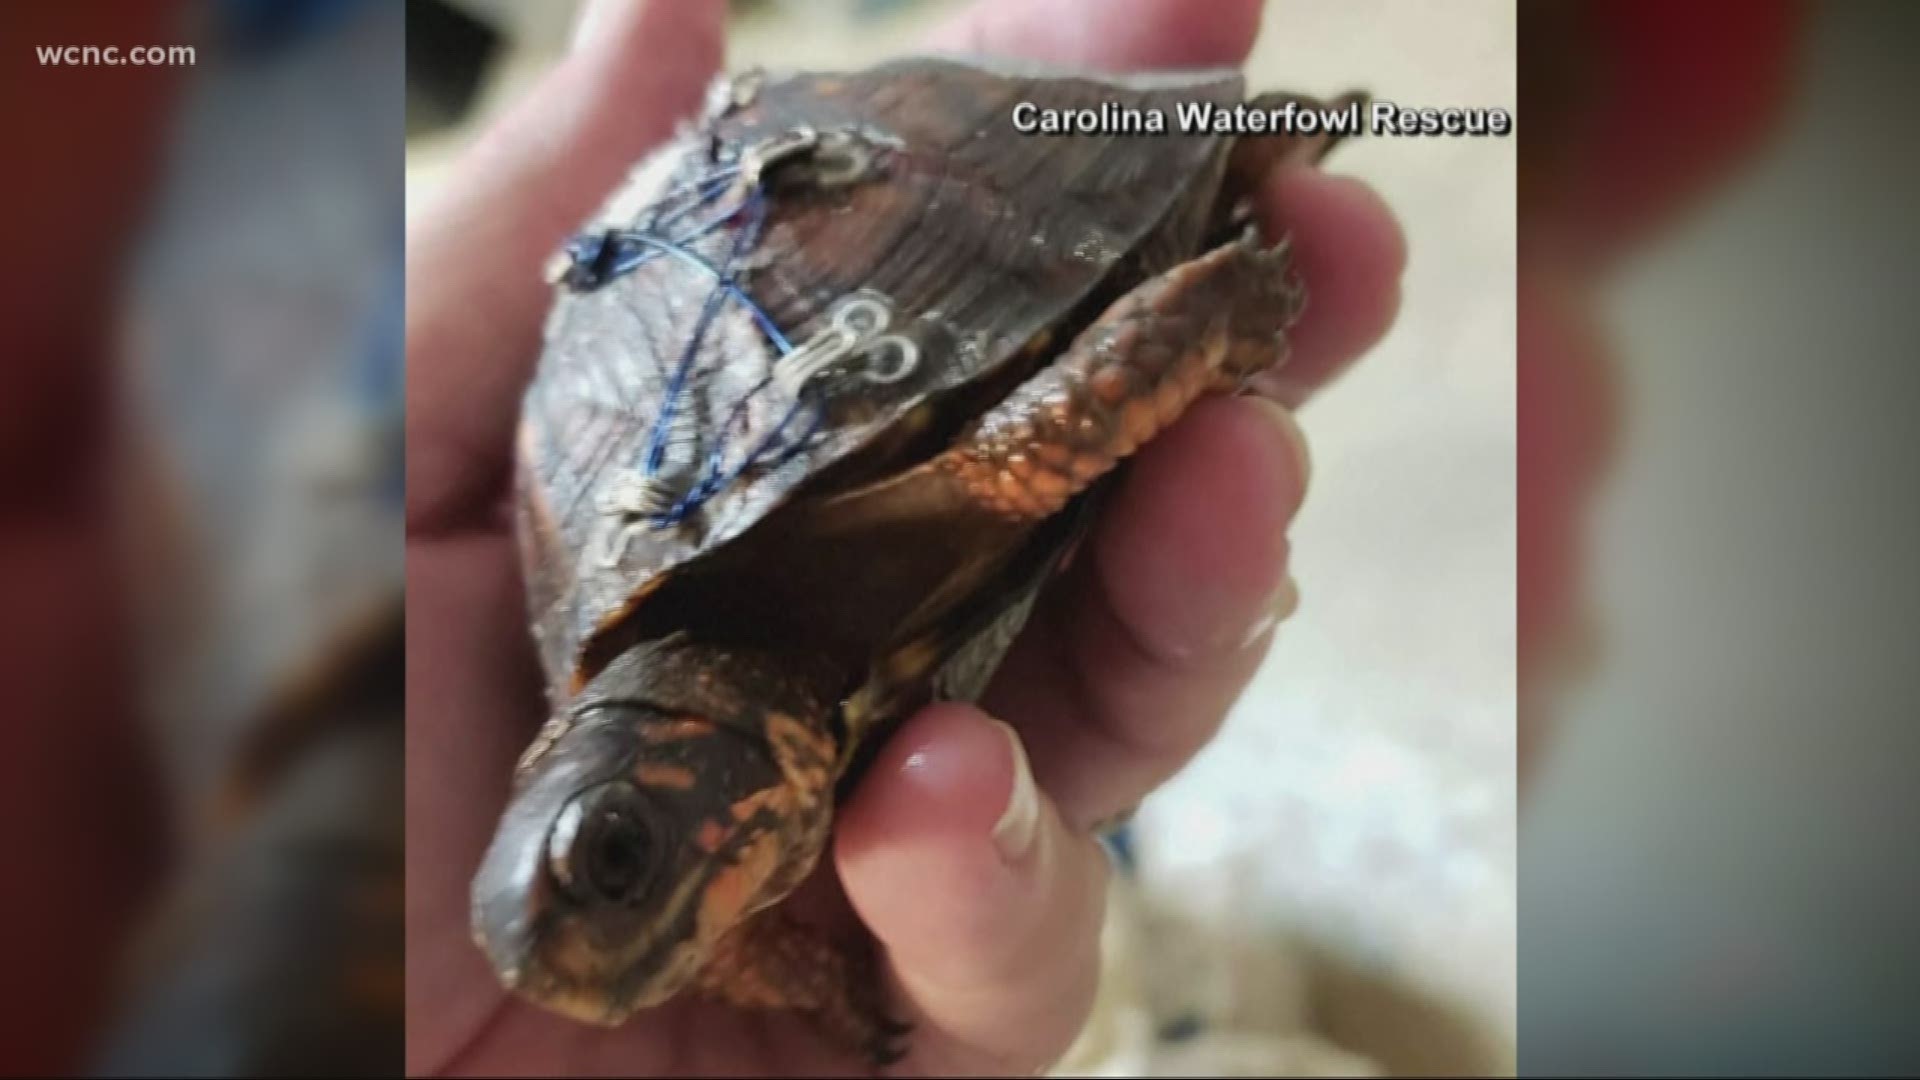 Carolina Waterfowl Rescue uses materials from the bras to wire turtle shells back together. Employees say the majority of turtles they see have been run over by cars or boats.